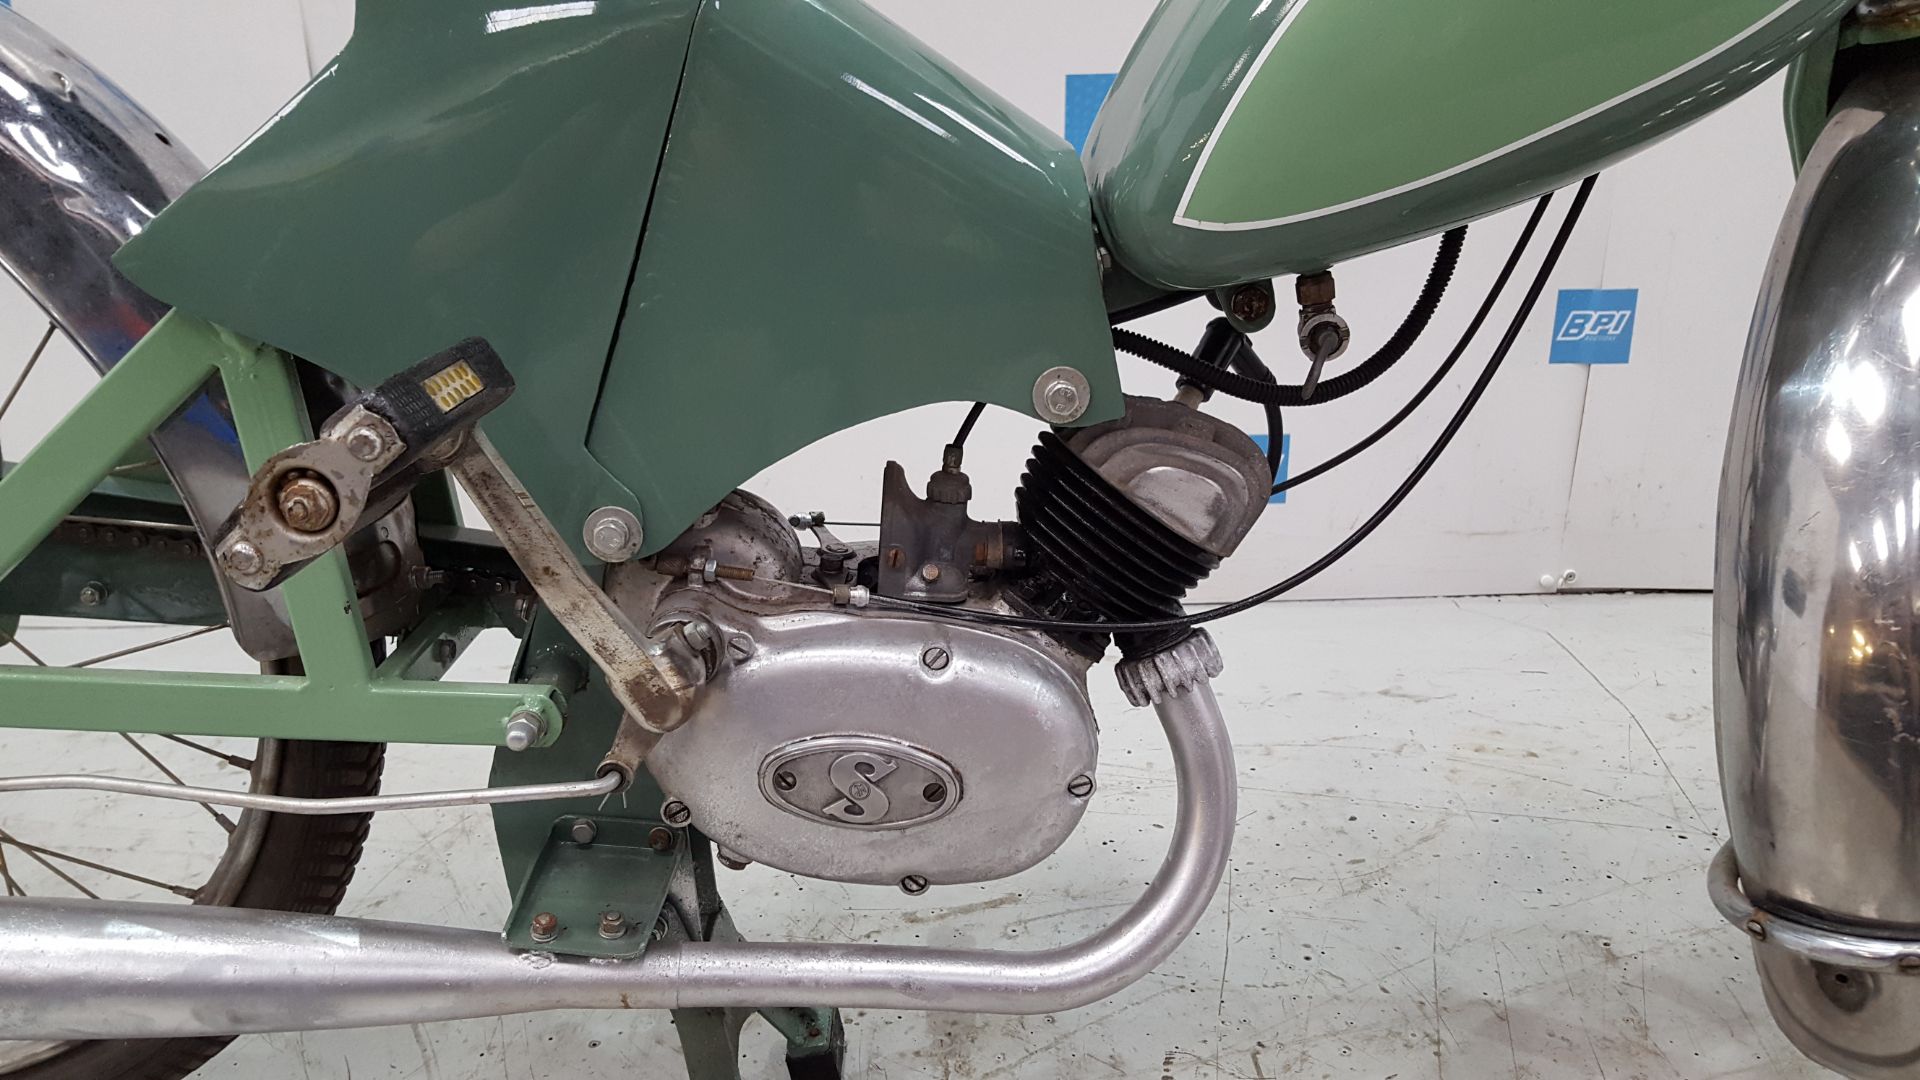 1955 Meister Moped 50cc - Image 8 of 10